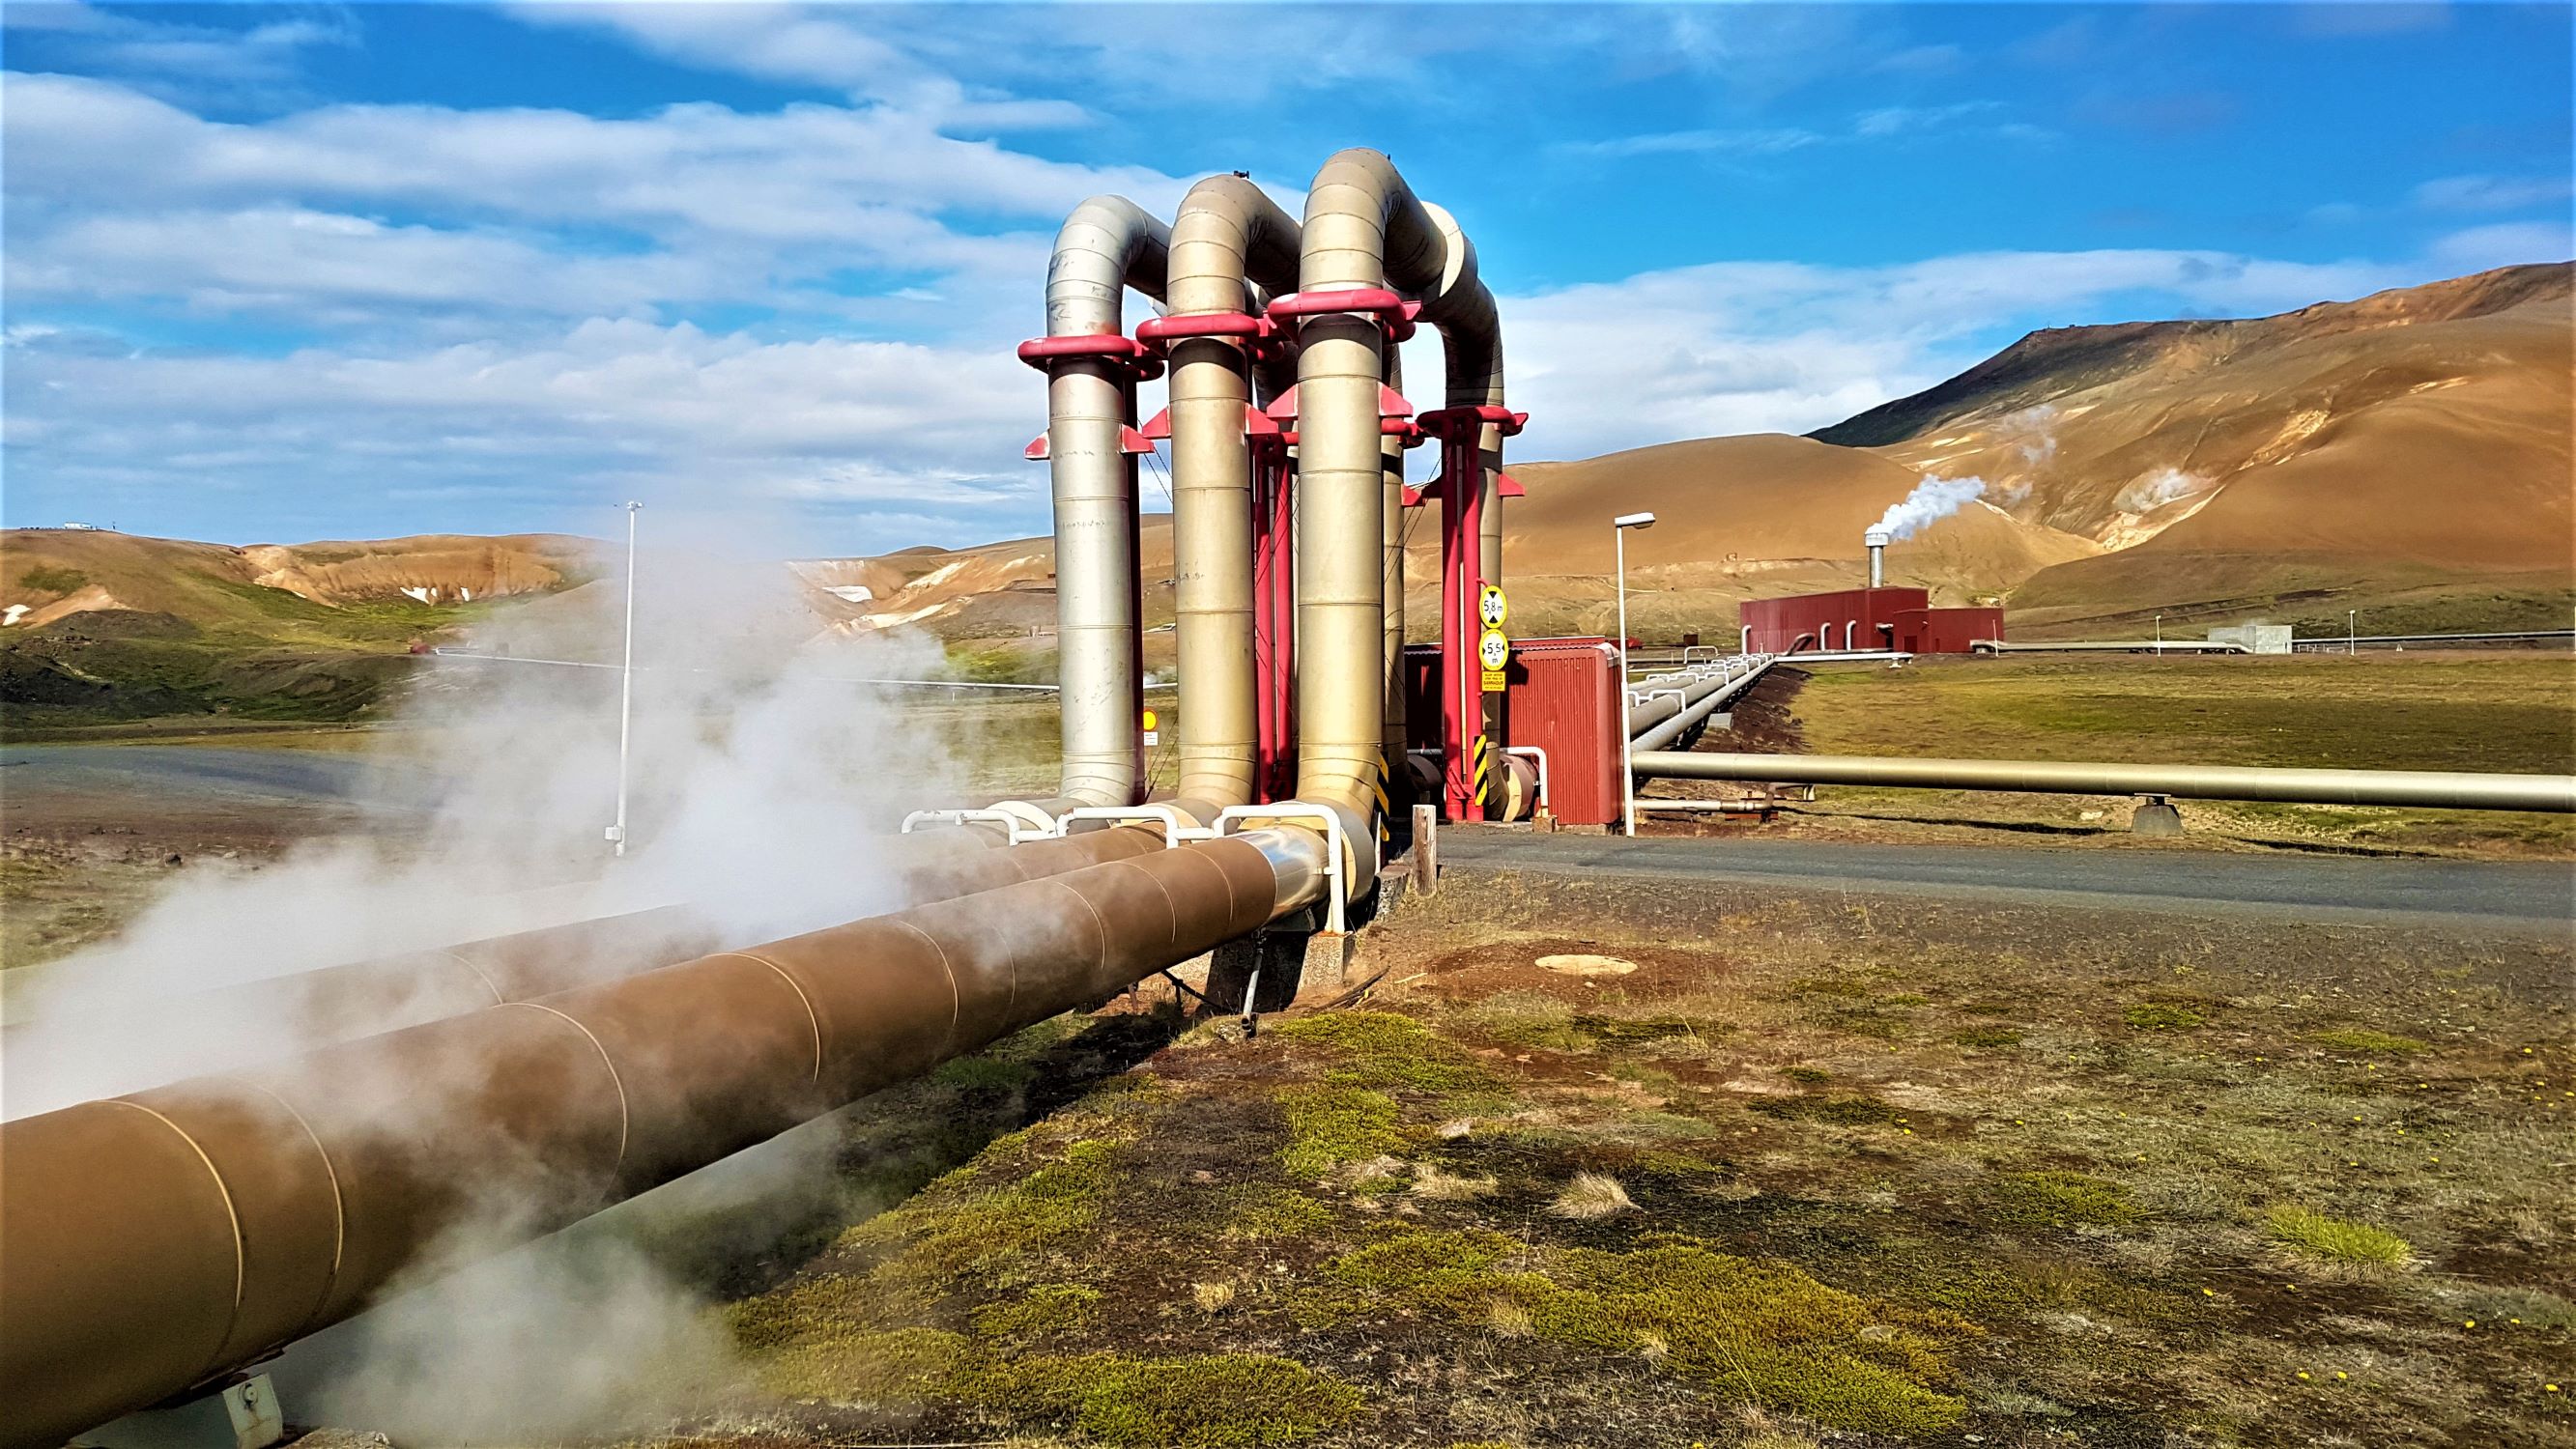 A geothermal power plant in Iceland showing the overground pipes with steam pouring out